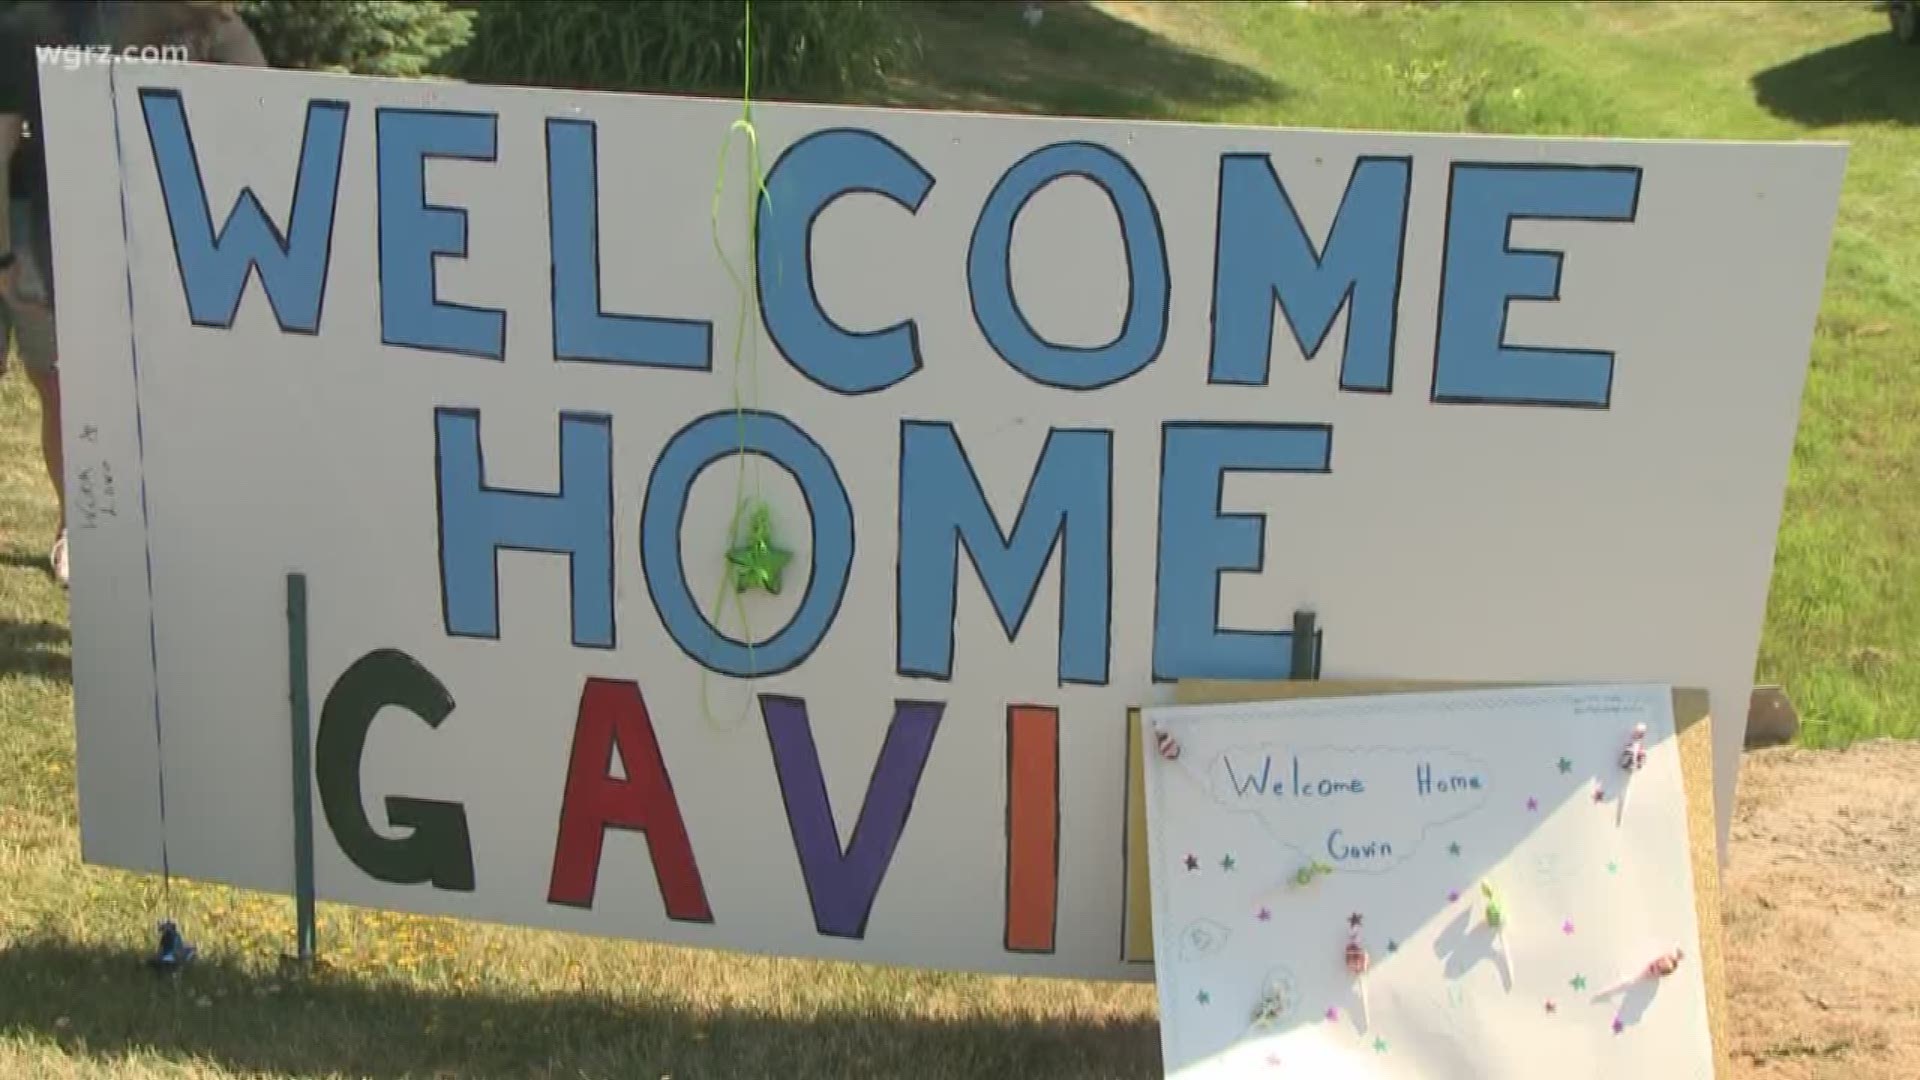 Homecoming for Gavin after lawnmower accident